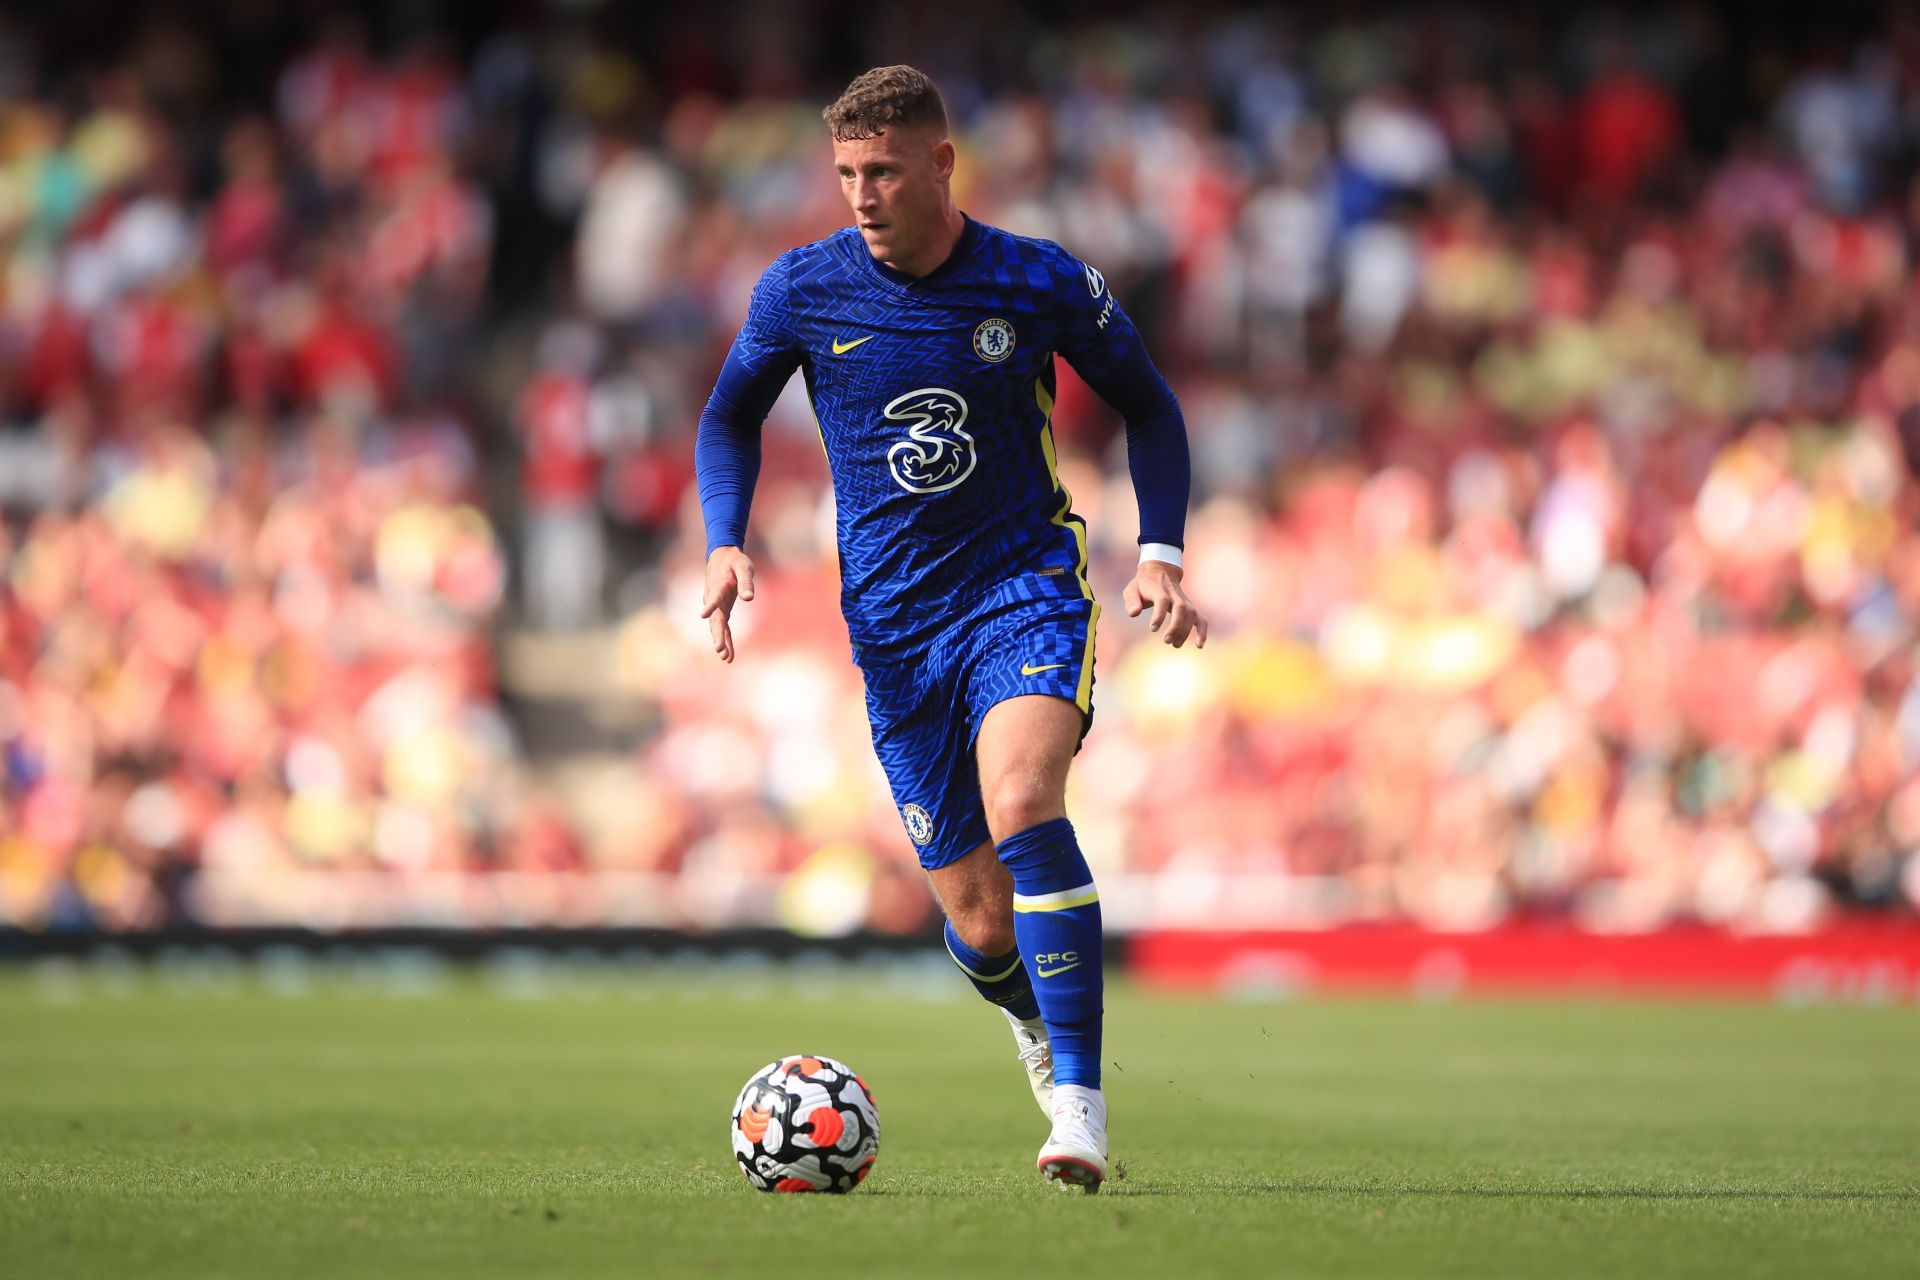 Barkley could be a great addition at Newcastle